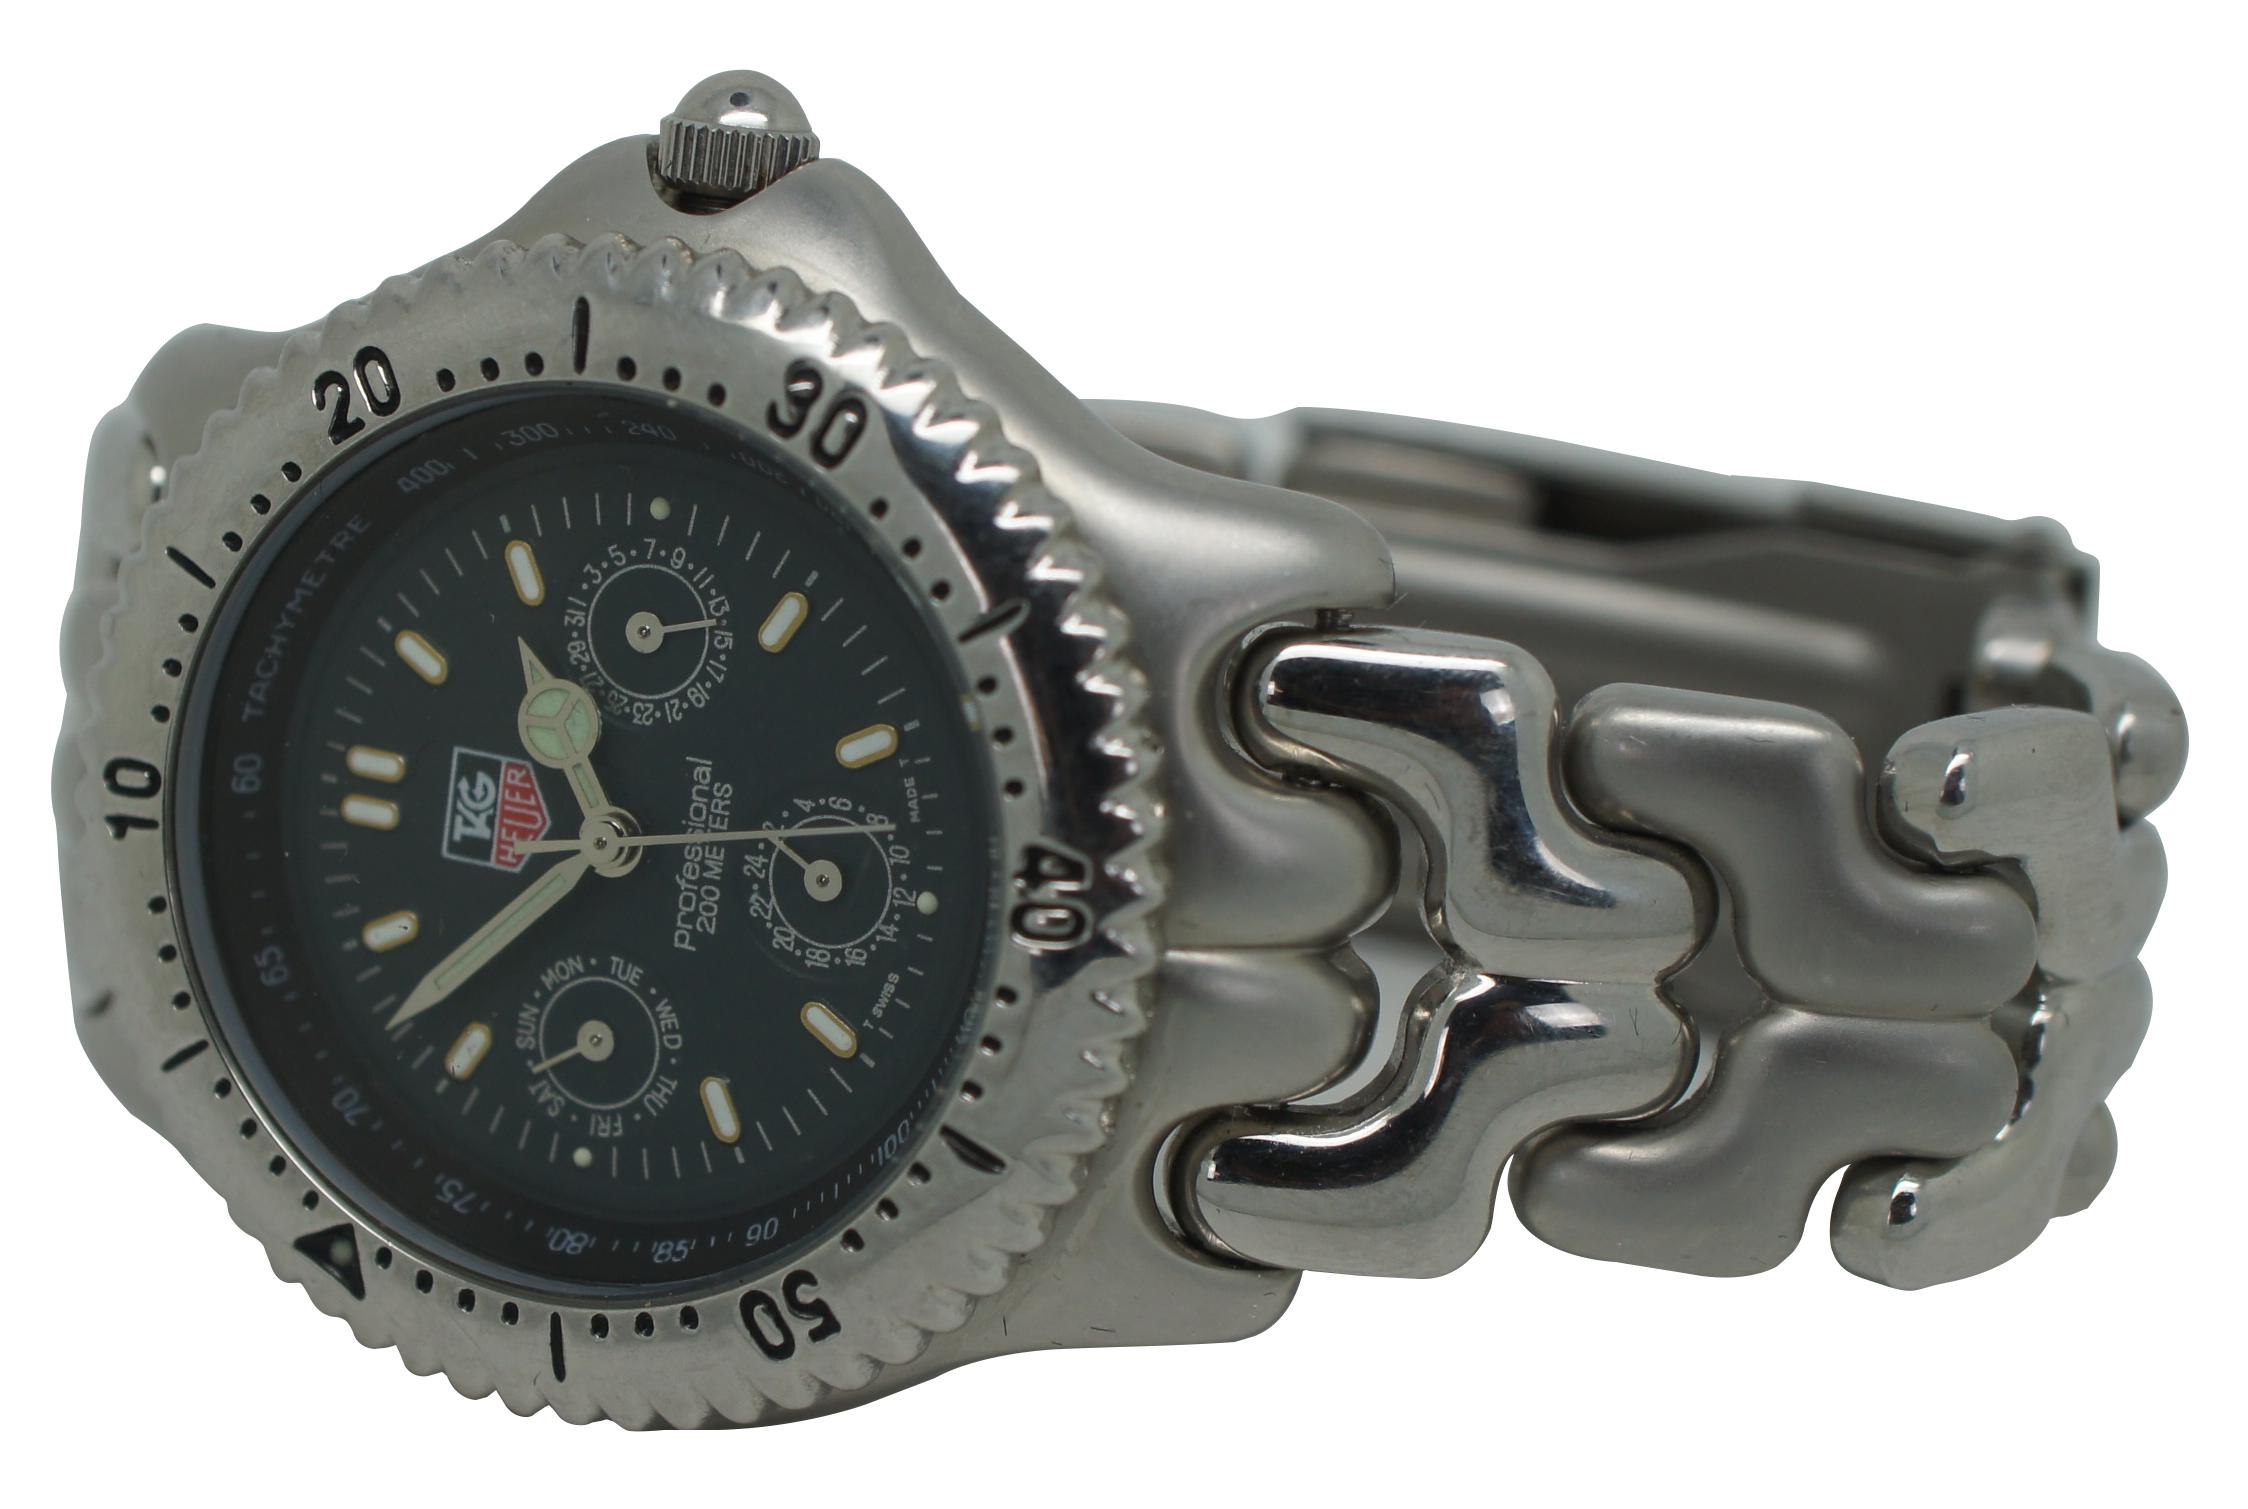 Tag Heuer chronograph wristwatch with tachymetre, stainless steel case and band, water resistant to 200 meters.

Measures: Band - 8” x 0.75” / Face – 1” (Length x Width).